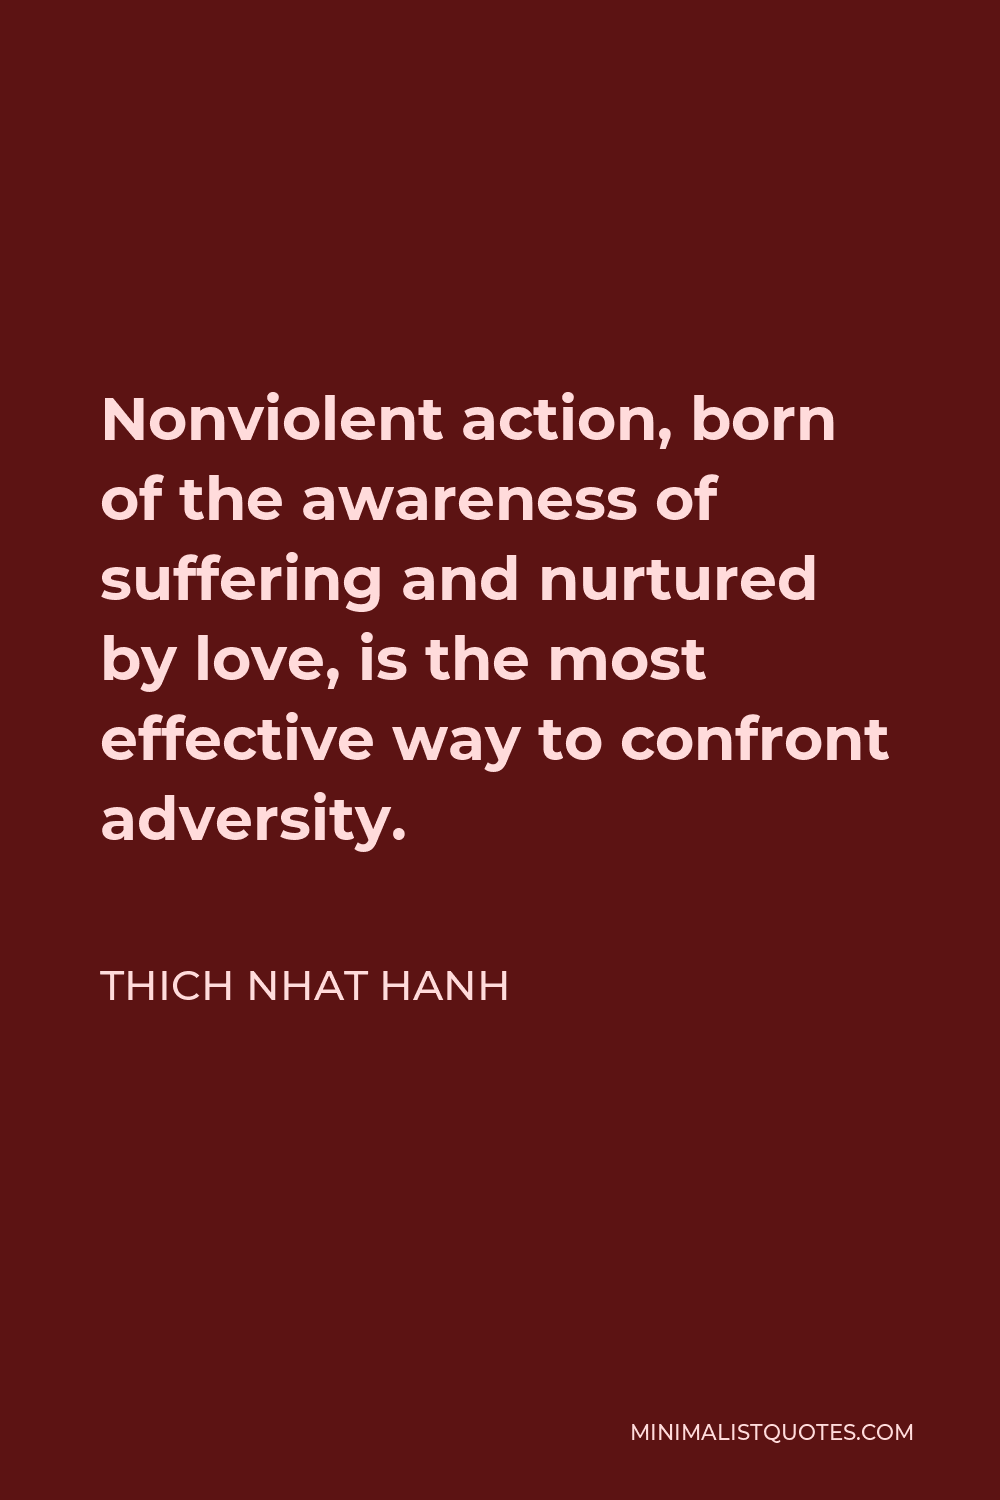 Thich Nhat Hanh Quote - Nonviolent action, born of the awareness of suffering and nurtured by love, is the most effective way to confront adversity.